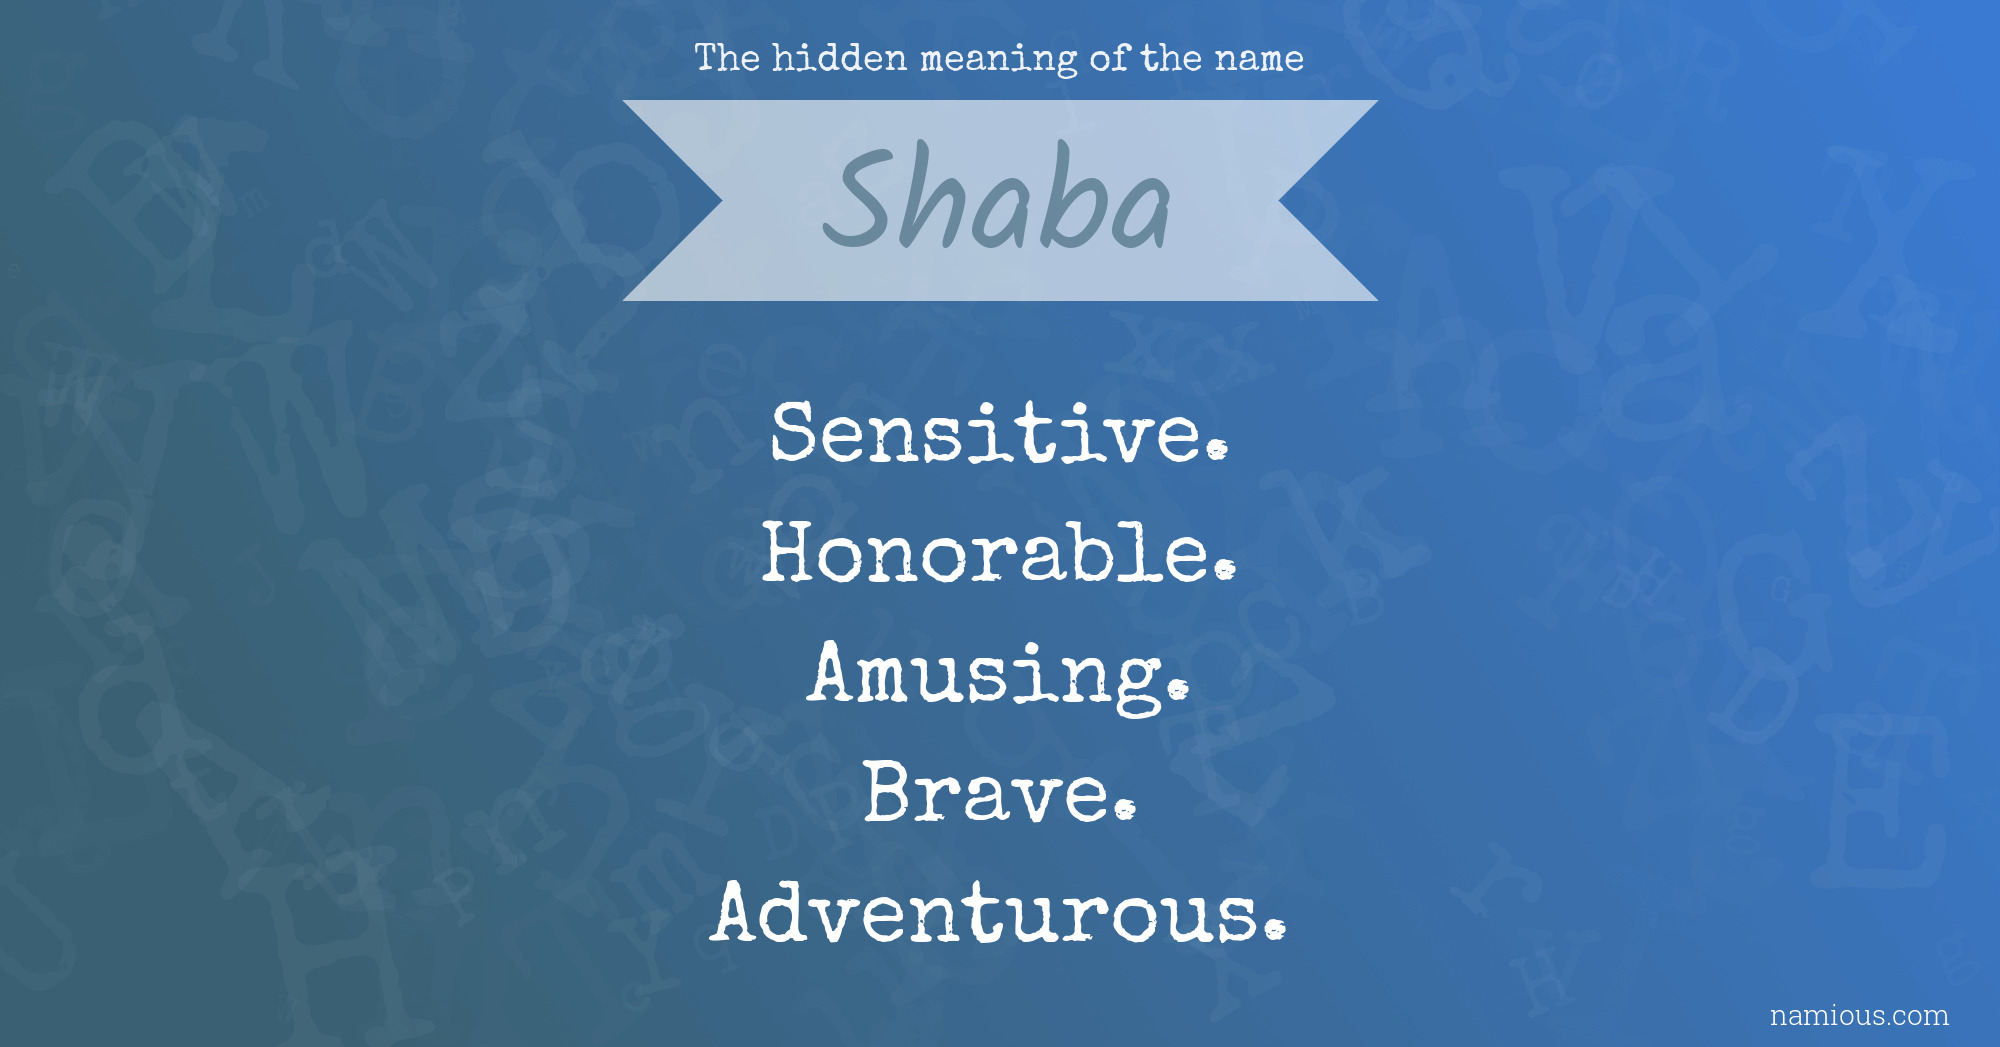 The hidden meaning of the name Shaba